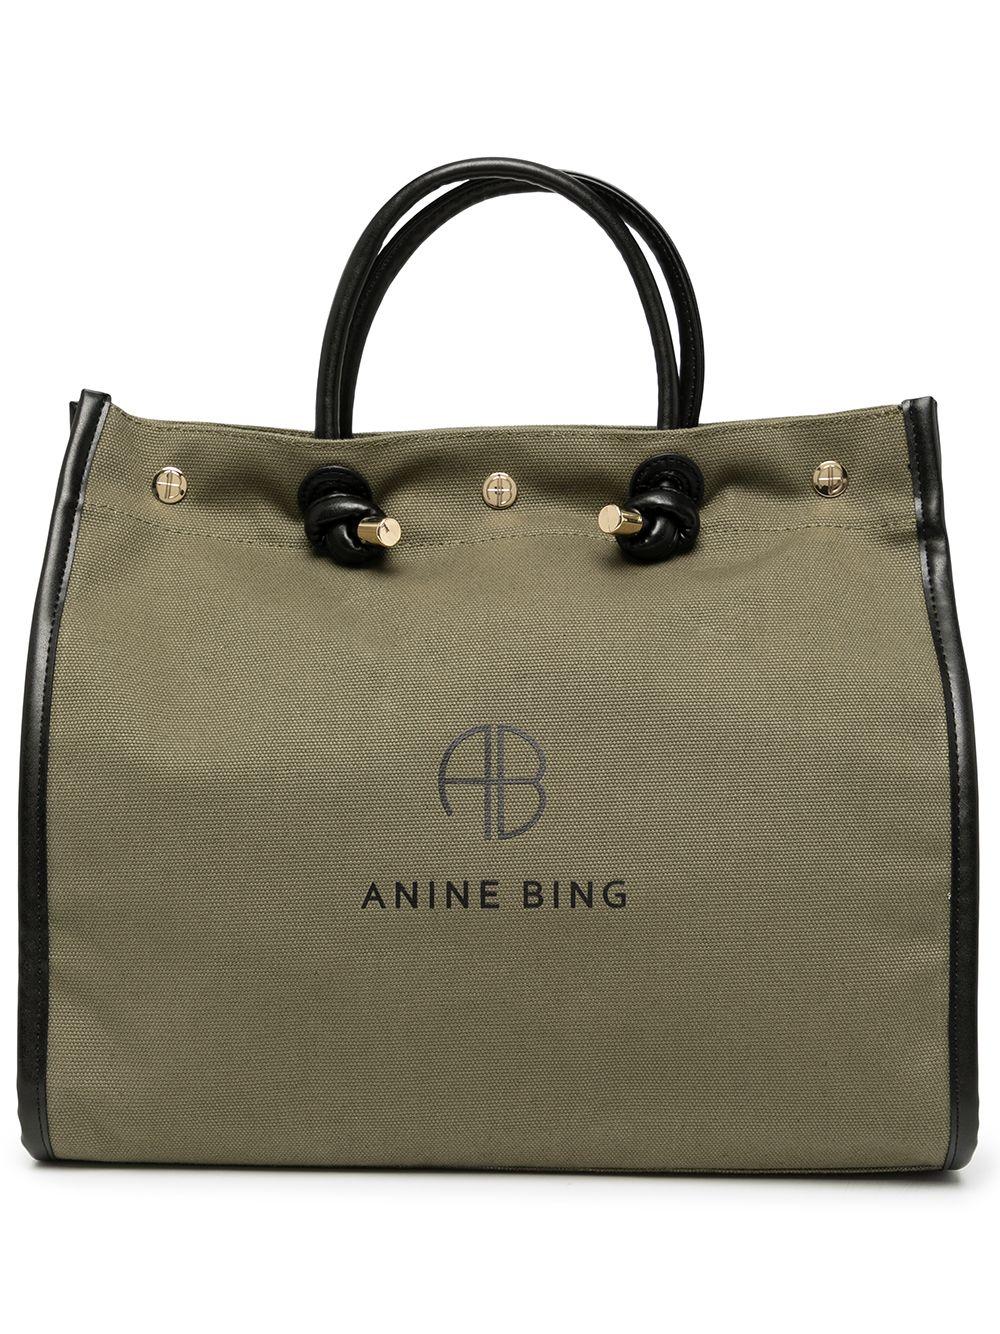 Taylin Tote - Natural by ANINE BING at ORCHARD MILE